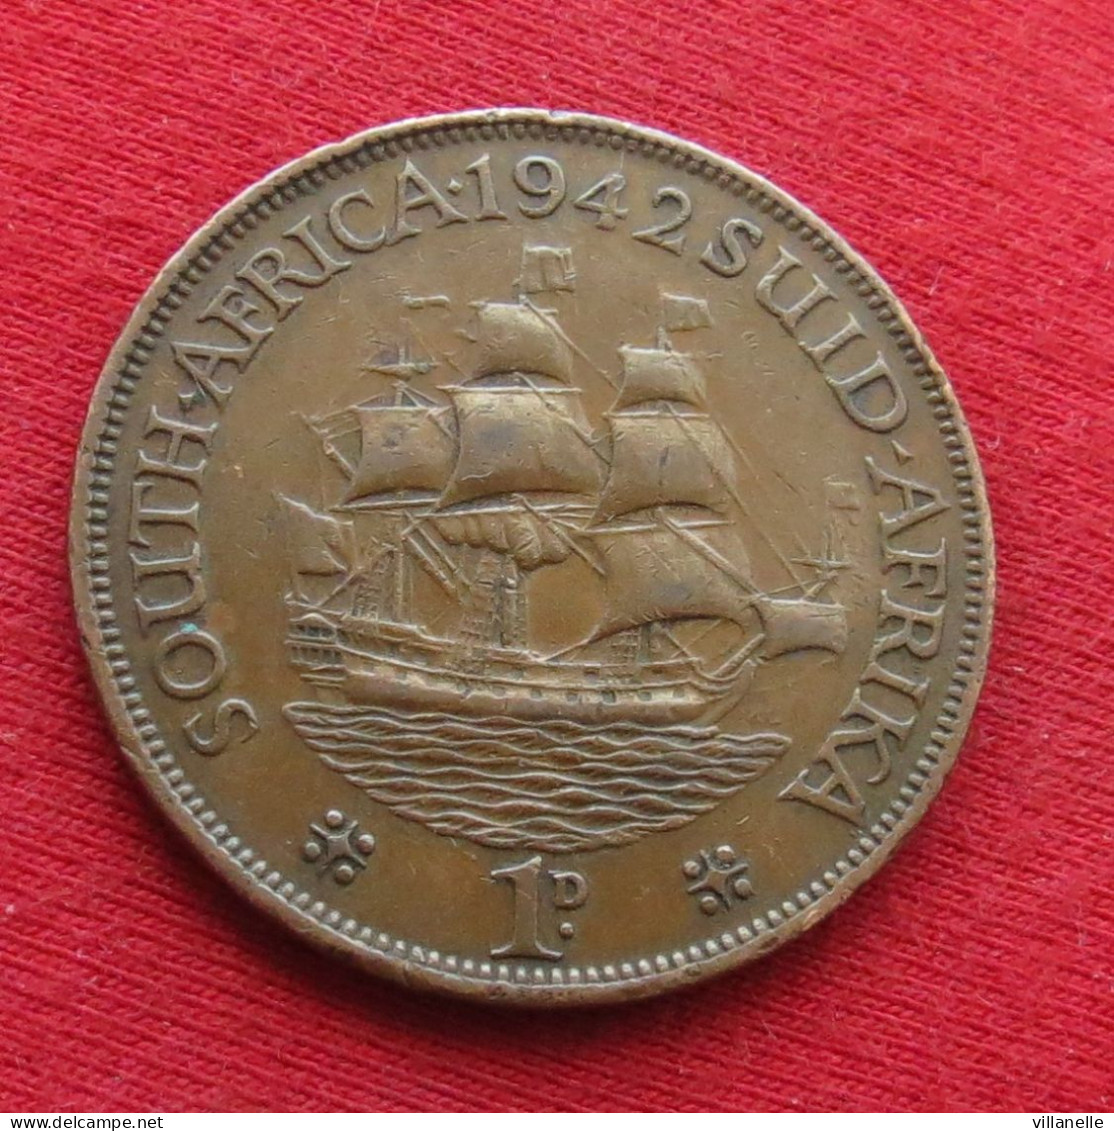 South Africa 1 Penny 1942 Without Star After Date   Africa Do Sul RSA Afrique Do Sud Afrika  #0 W ºº - Zuid-Afrika